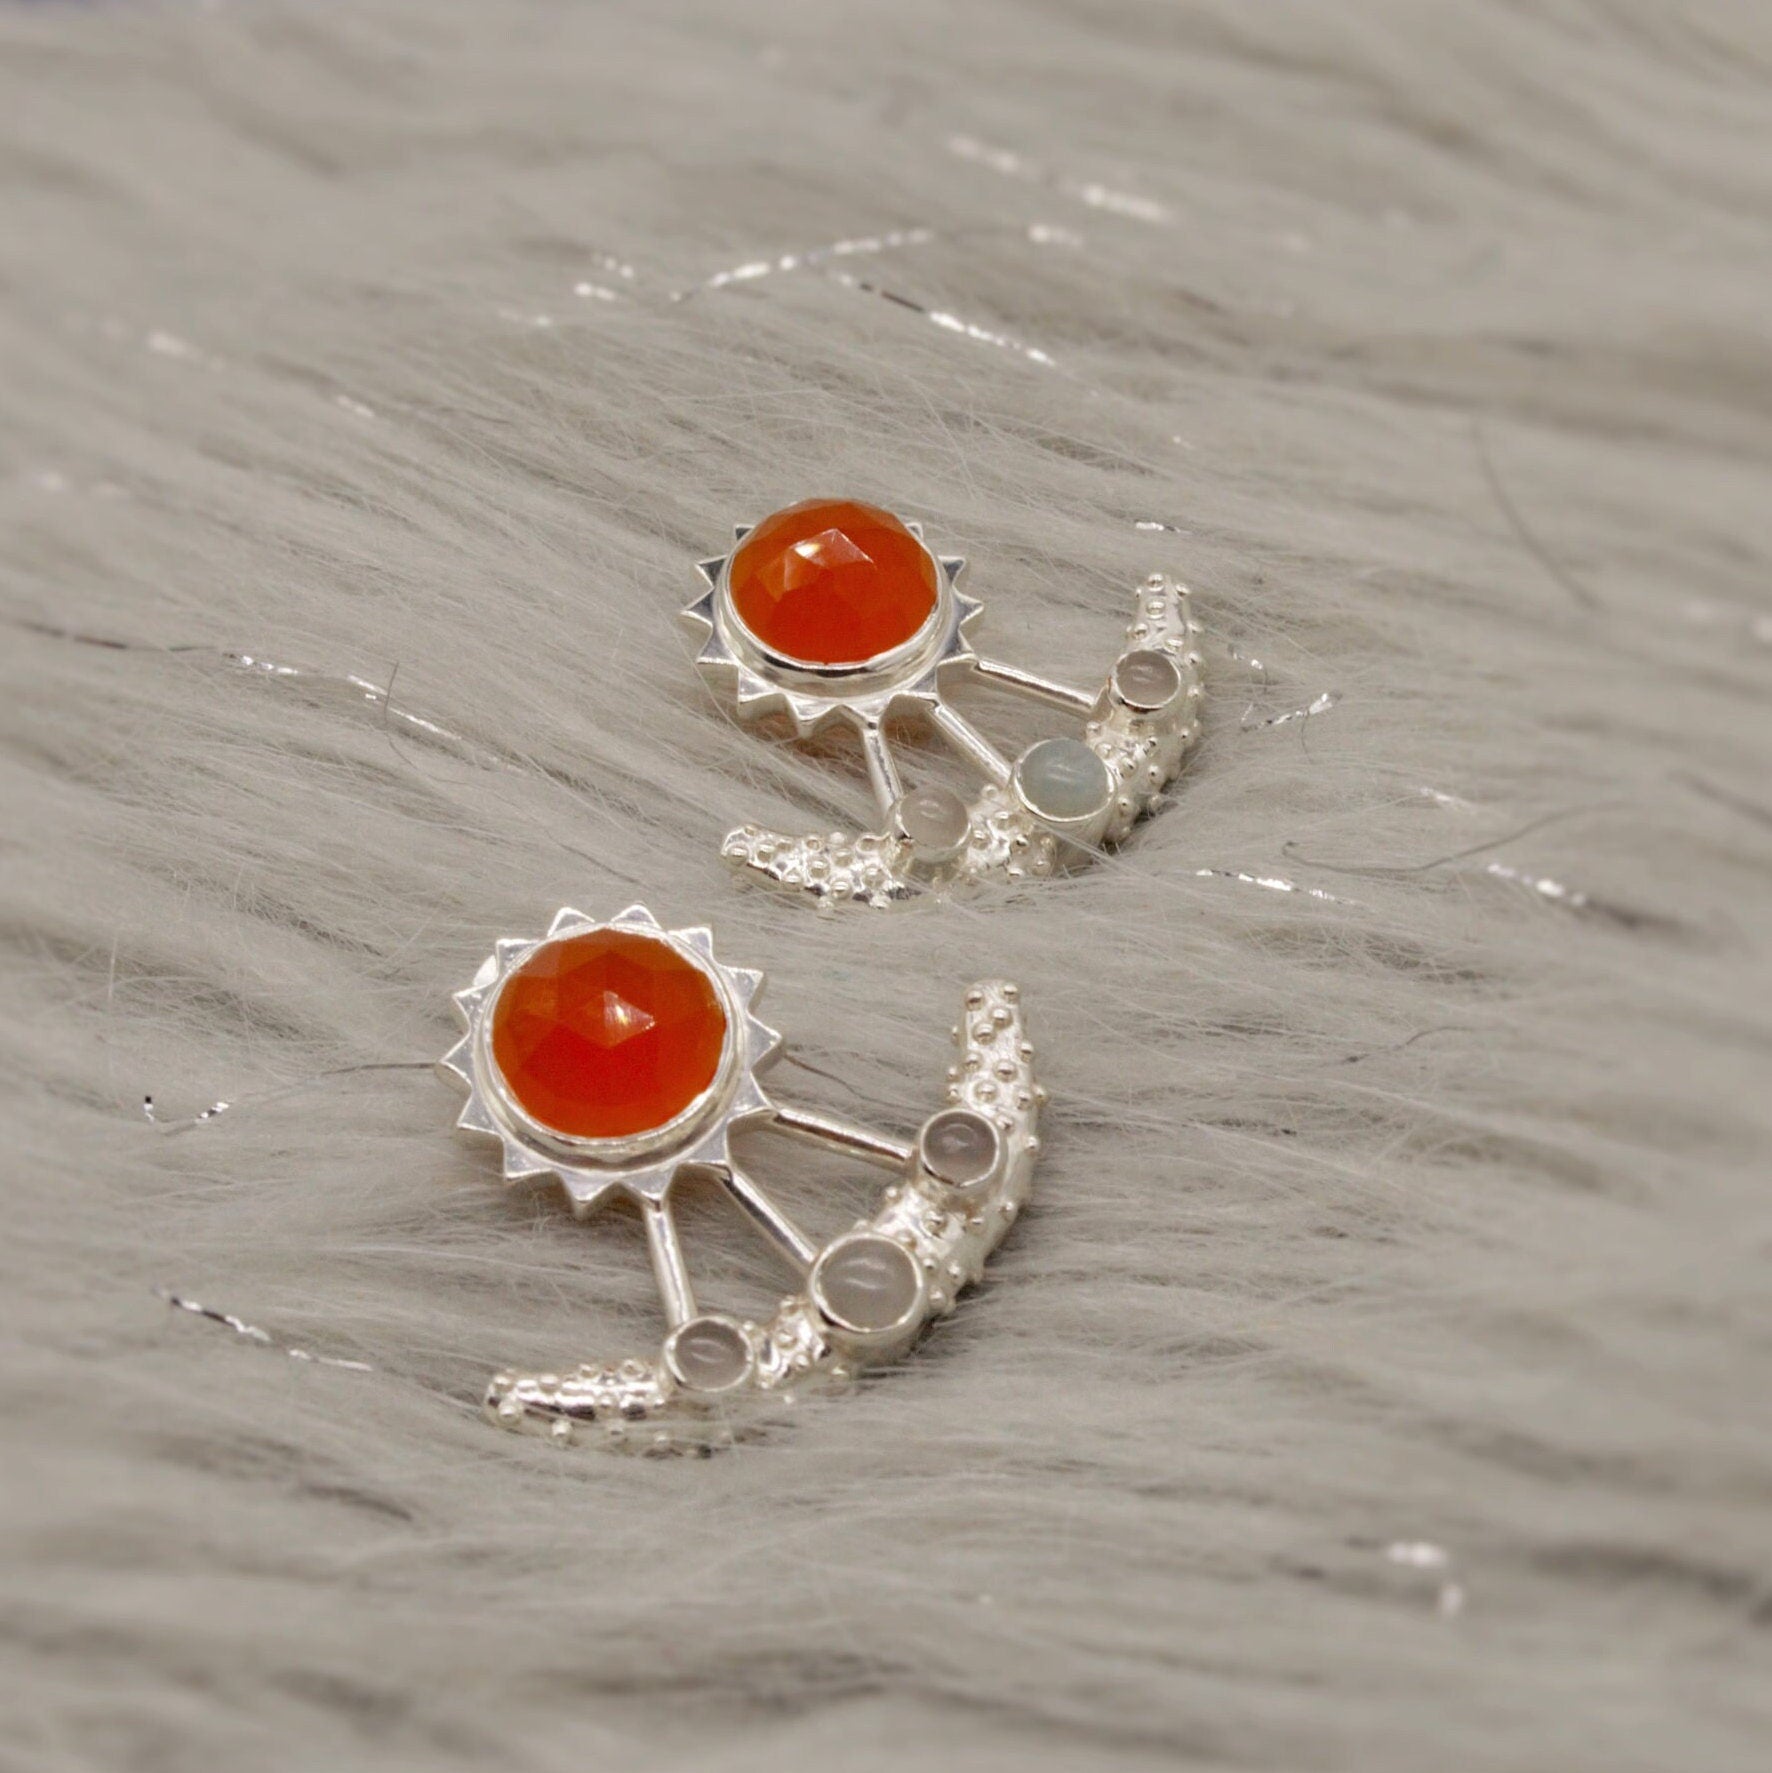 Carnelian and Aquamarine Earrings, Sterling Silver, March Birthstone Jewelry, Aquamarine crystal, Gemstone Earrings, Gift for Her